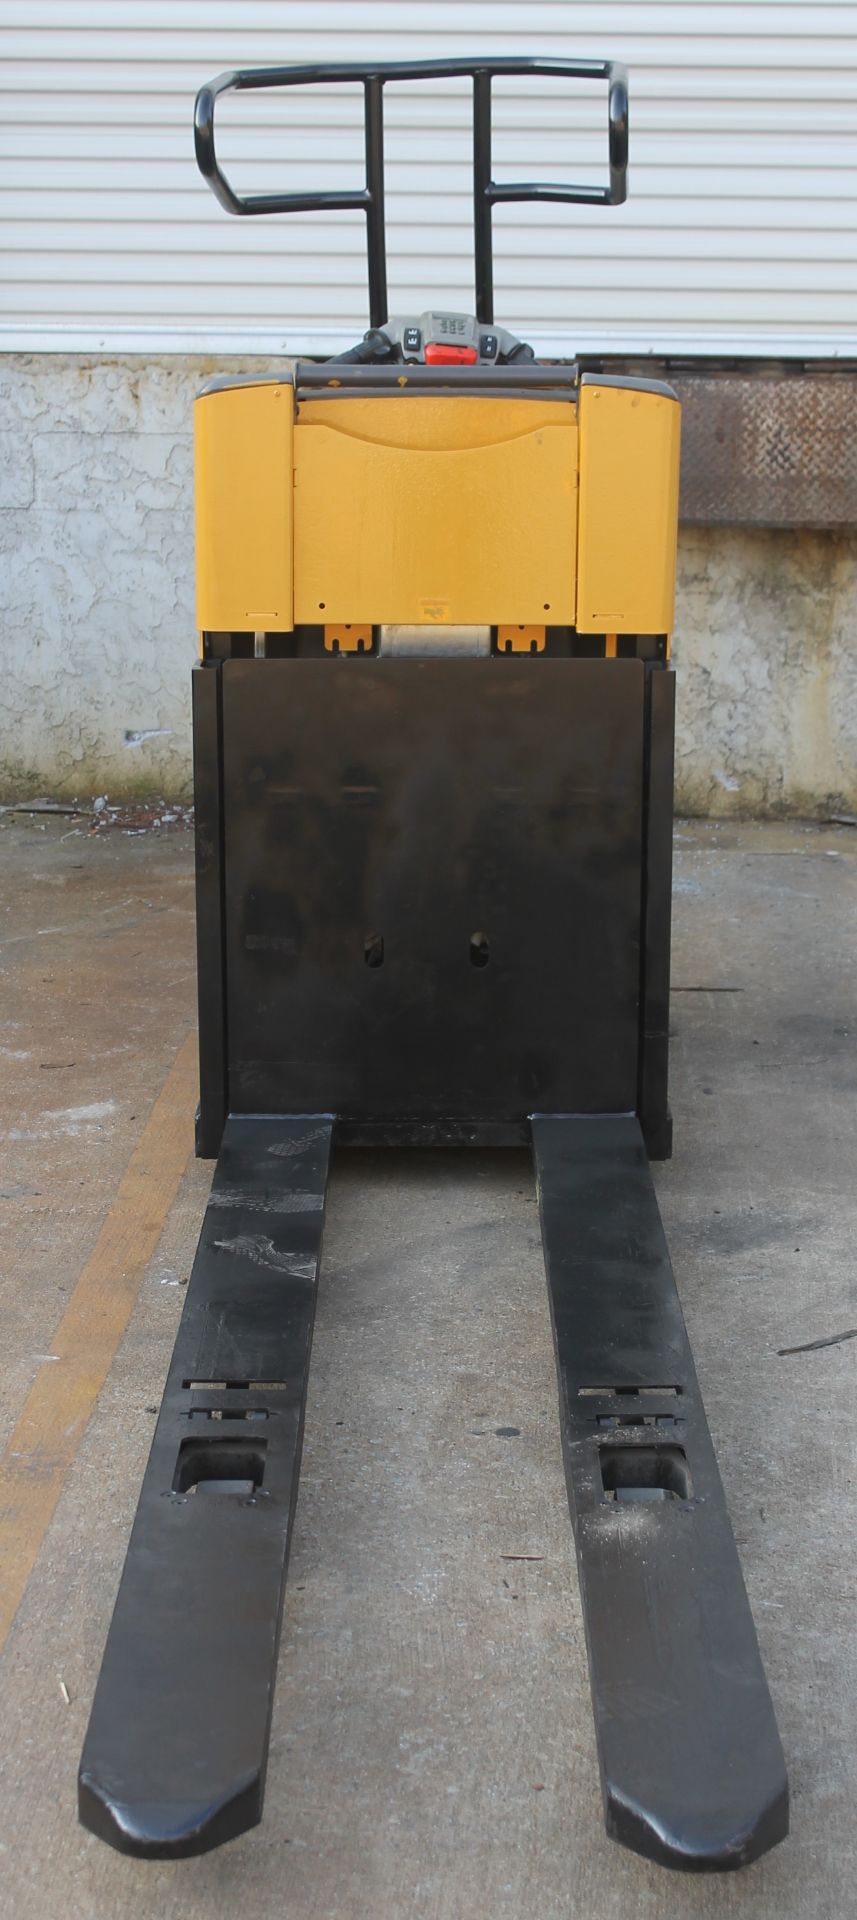 2009 ATLET TEMPO PPD DRIVER LIFT LOW LEVEL ORDER PICKER WITH 24 VOLTS CHARGER, - Image 7 of 10